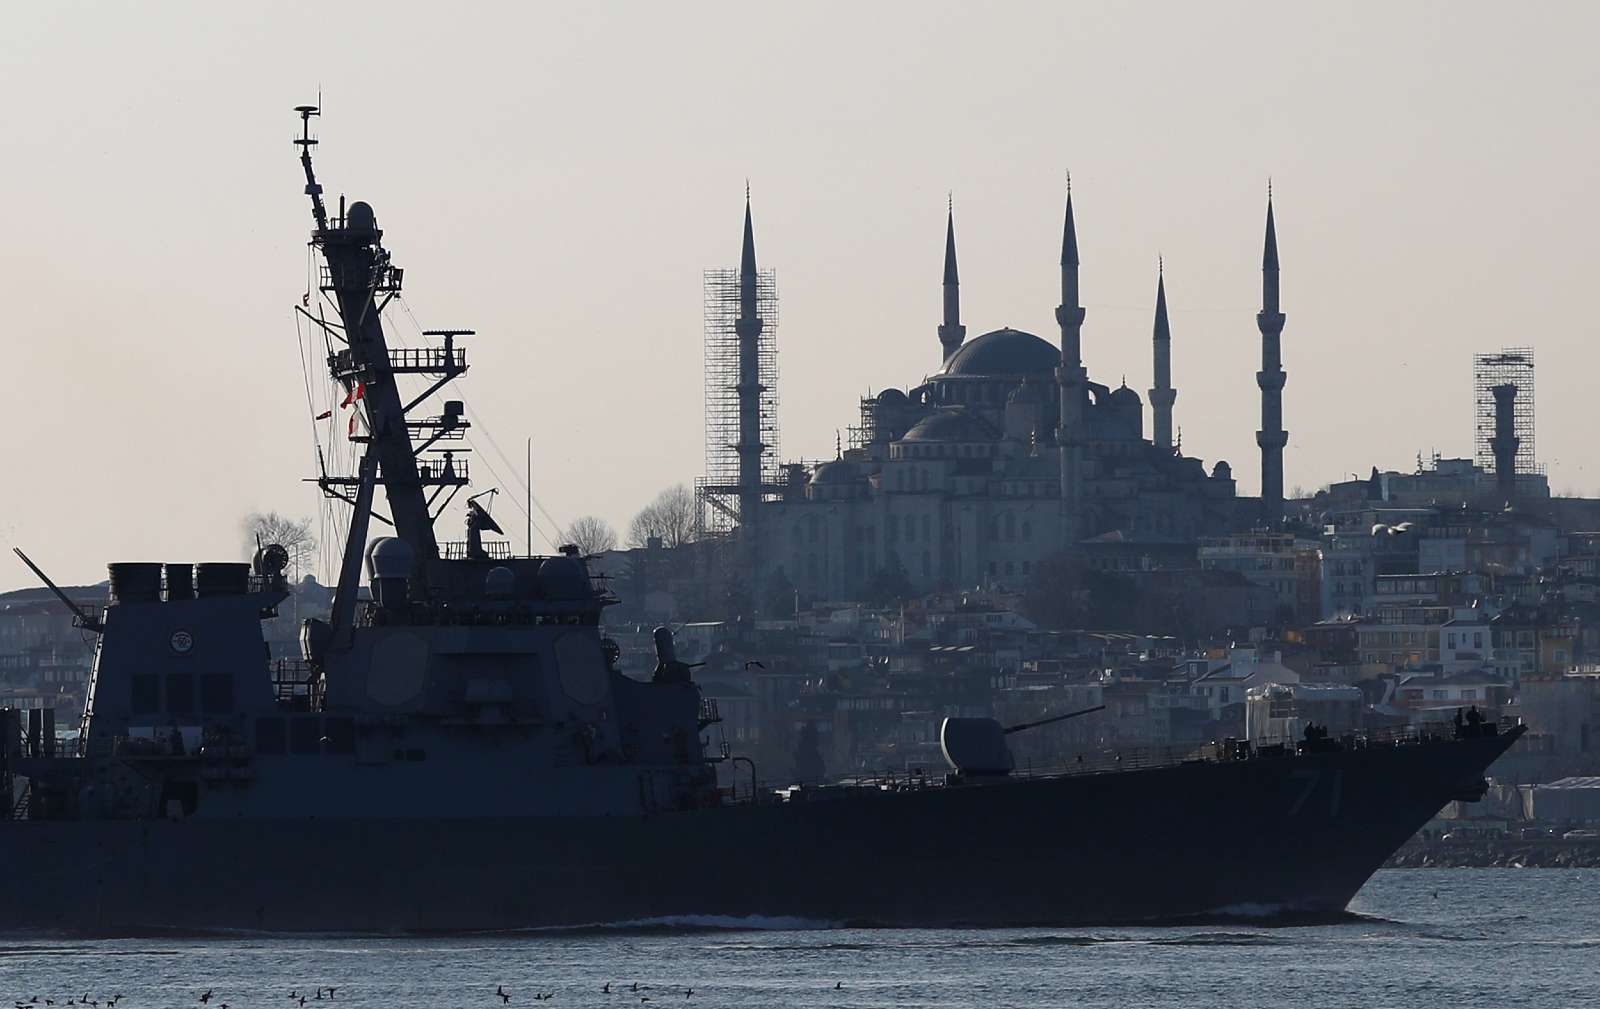 U.S. Navy guided-missile destroyer USS Ross, with the Blue mosque in the background, sails in the Bosphorus, on its way to the Black Sea, in Istanbul, Turkey, February 23, 2020. REUTERS/Murad Sezer